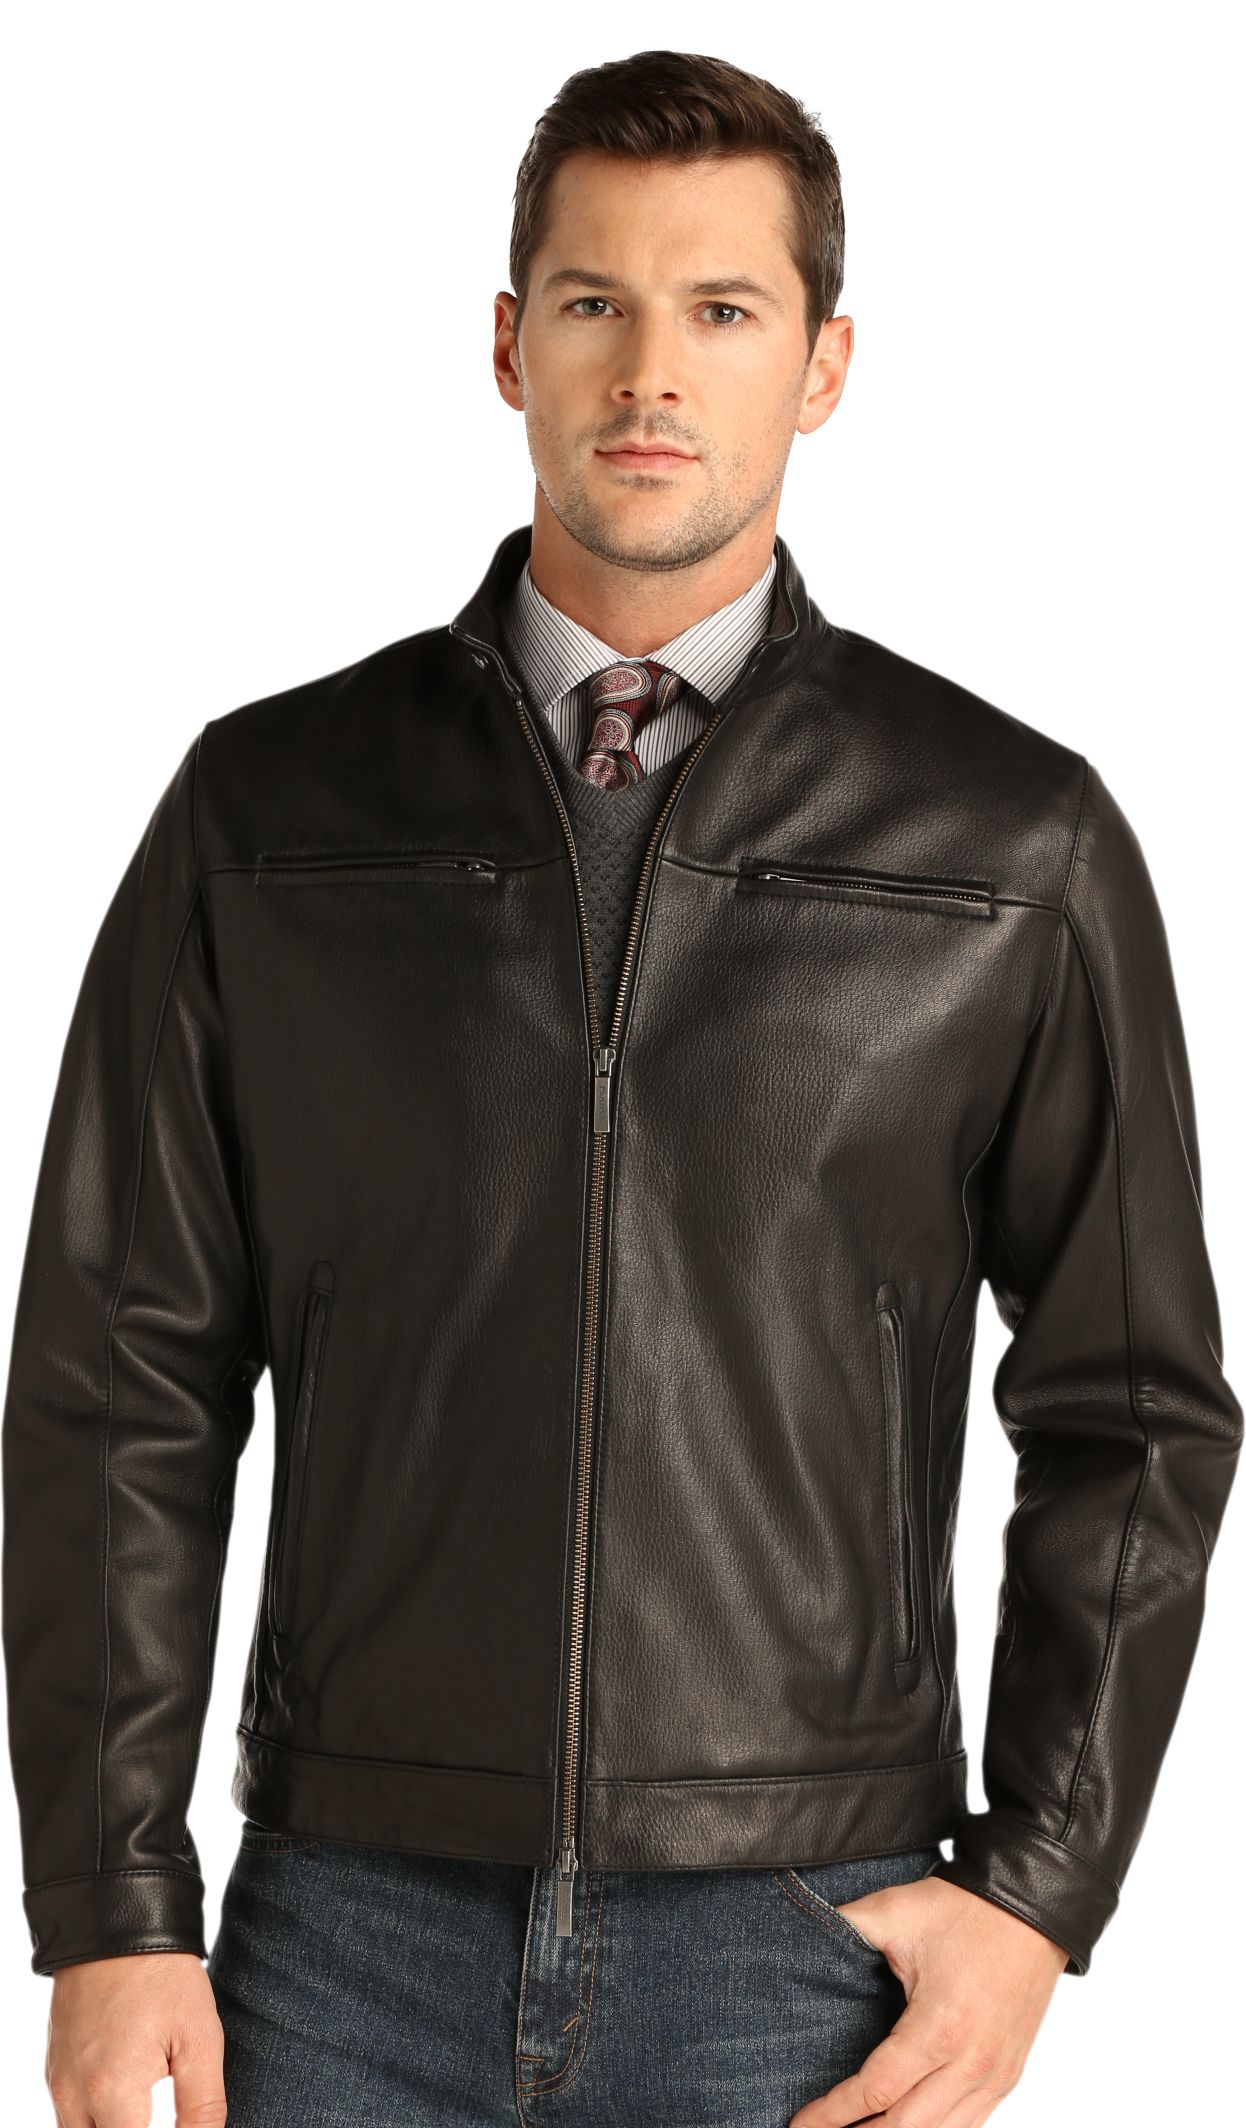 Men&39s Leather Jackets &amp Bomber Jackets | Men&39s Outerwear | JoS. A